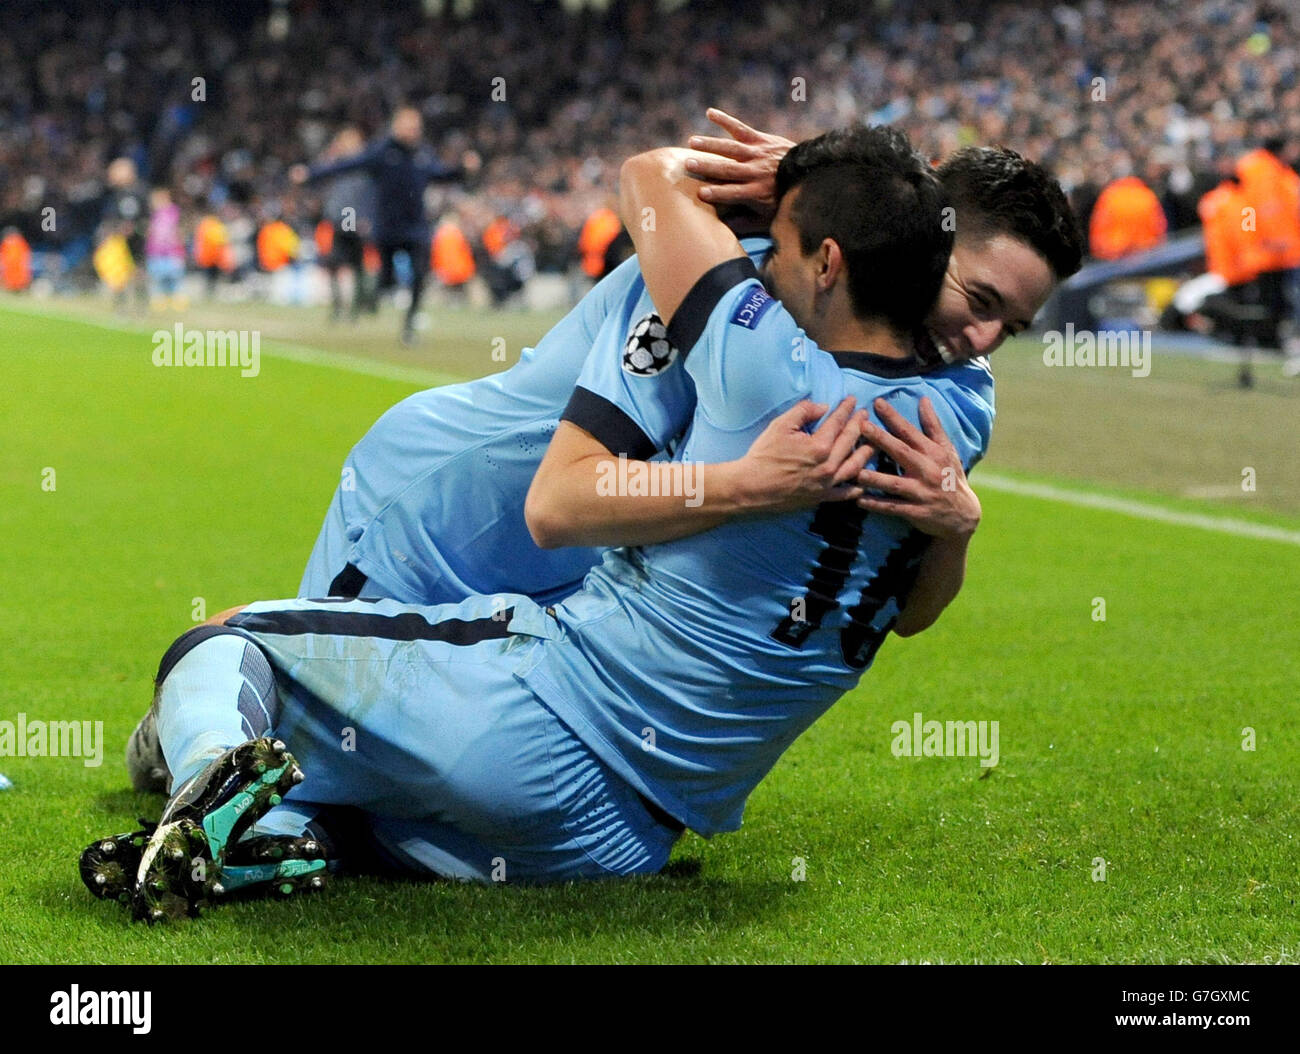 Manchester City's Sergio Aguero (right) celebrates scoring his sides third goal of the game alongside teammate Samir Nasri during the UEFA Champions League match at the Etihad Stadium, Manchester. Stock Photo